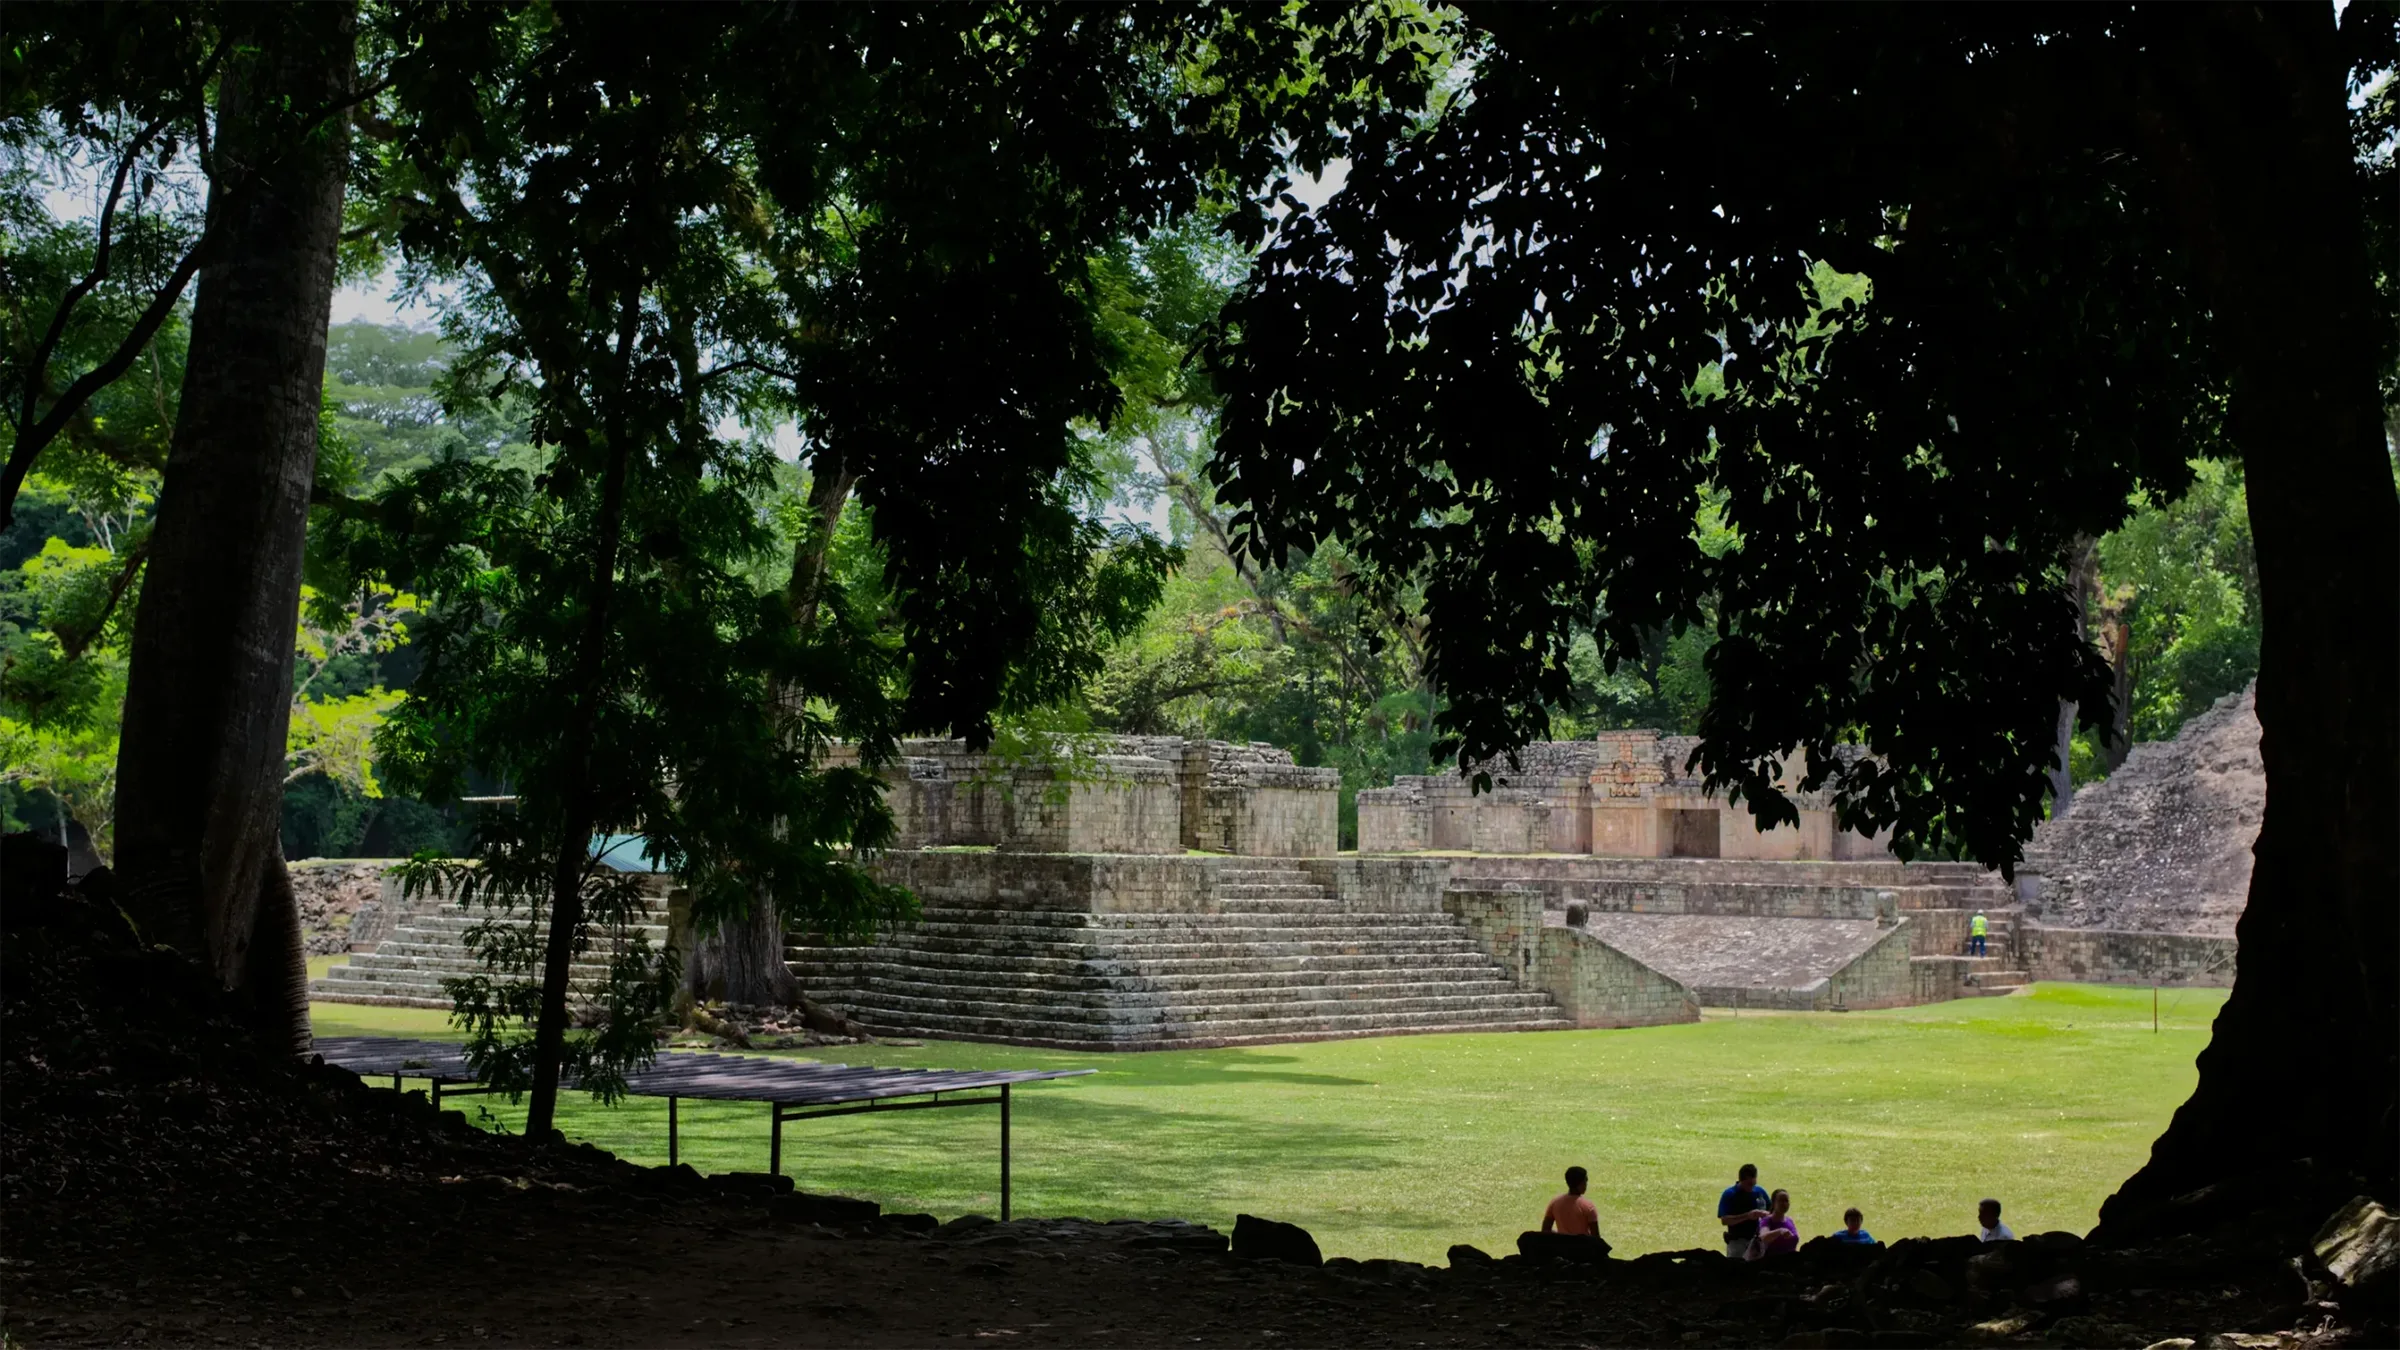 Enjoy an archaeological journey in Copan Ruinas